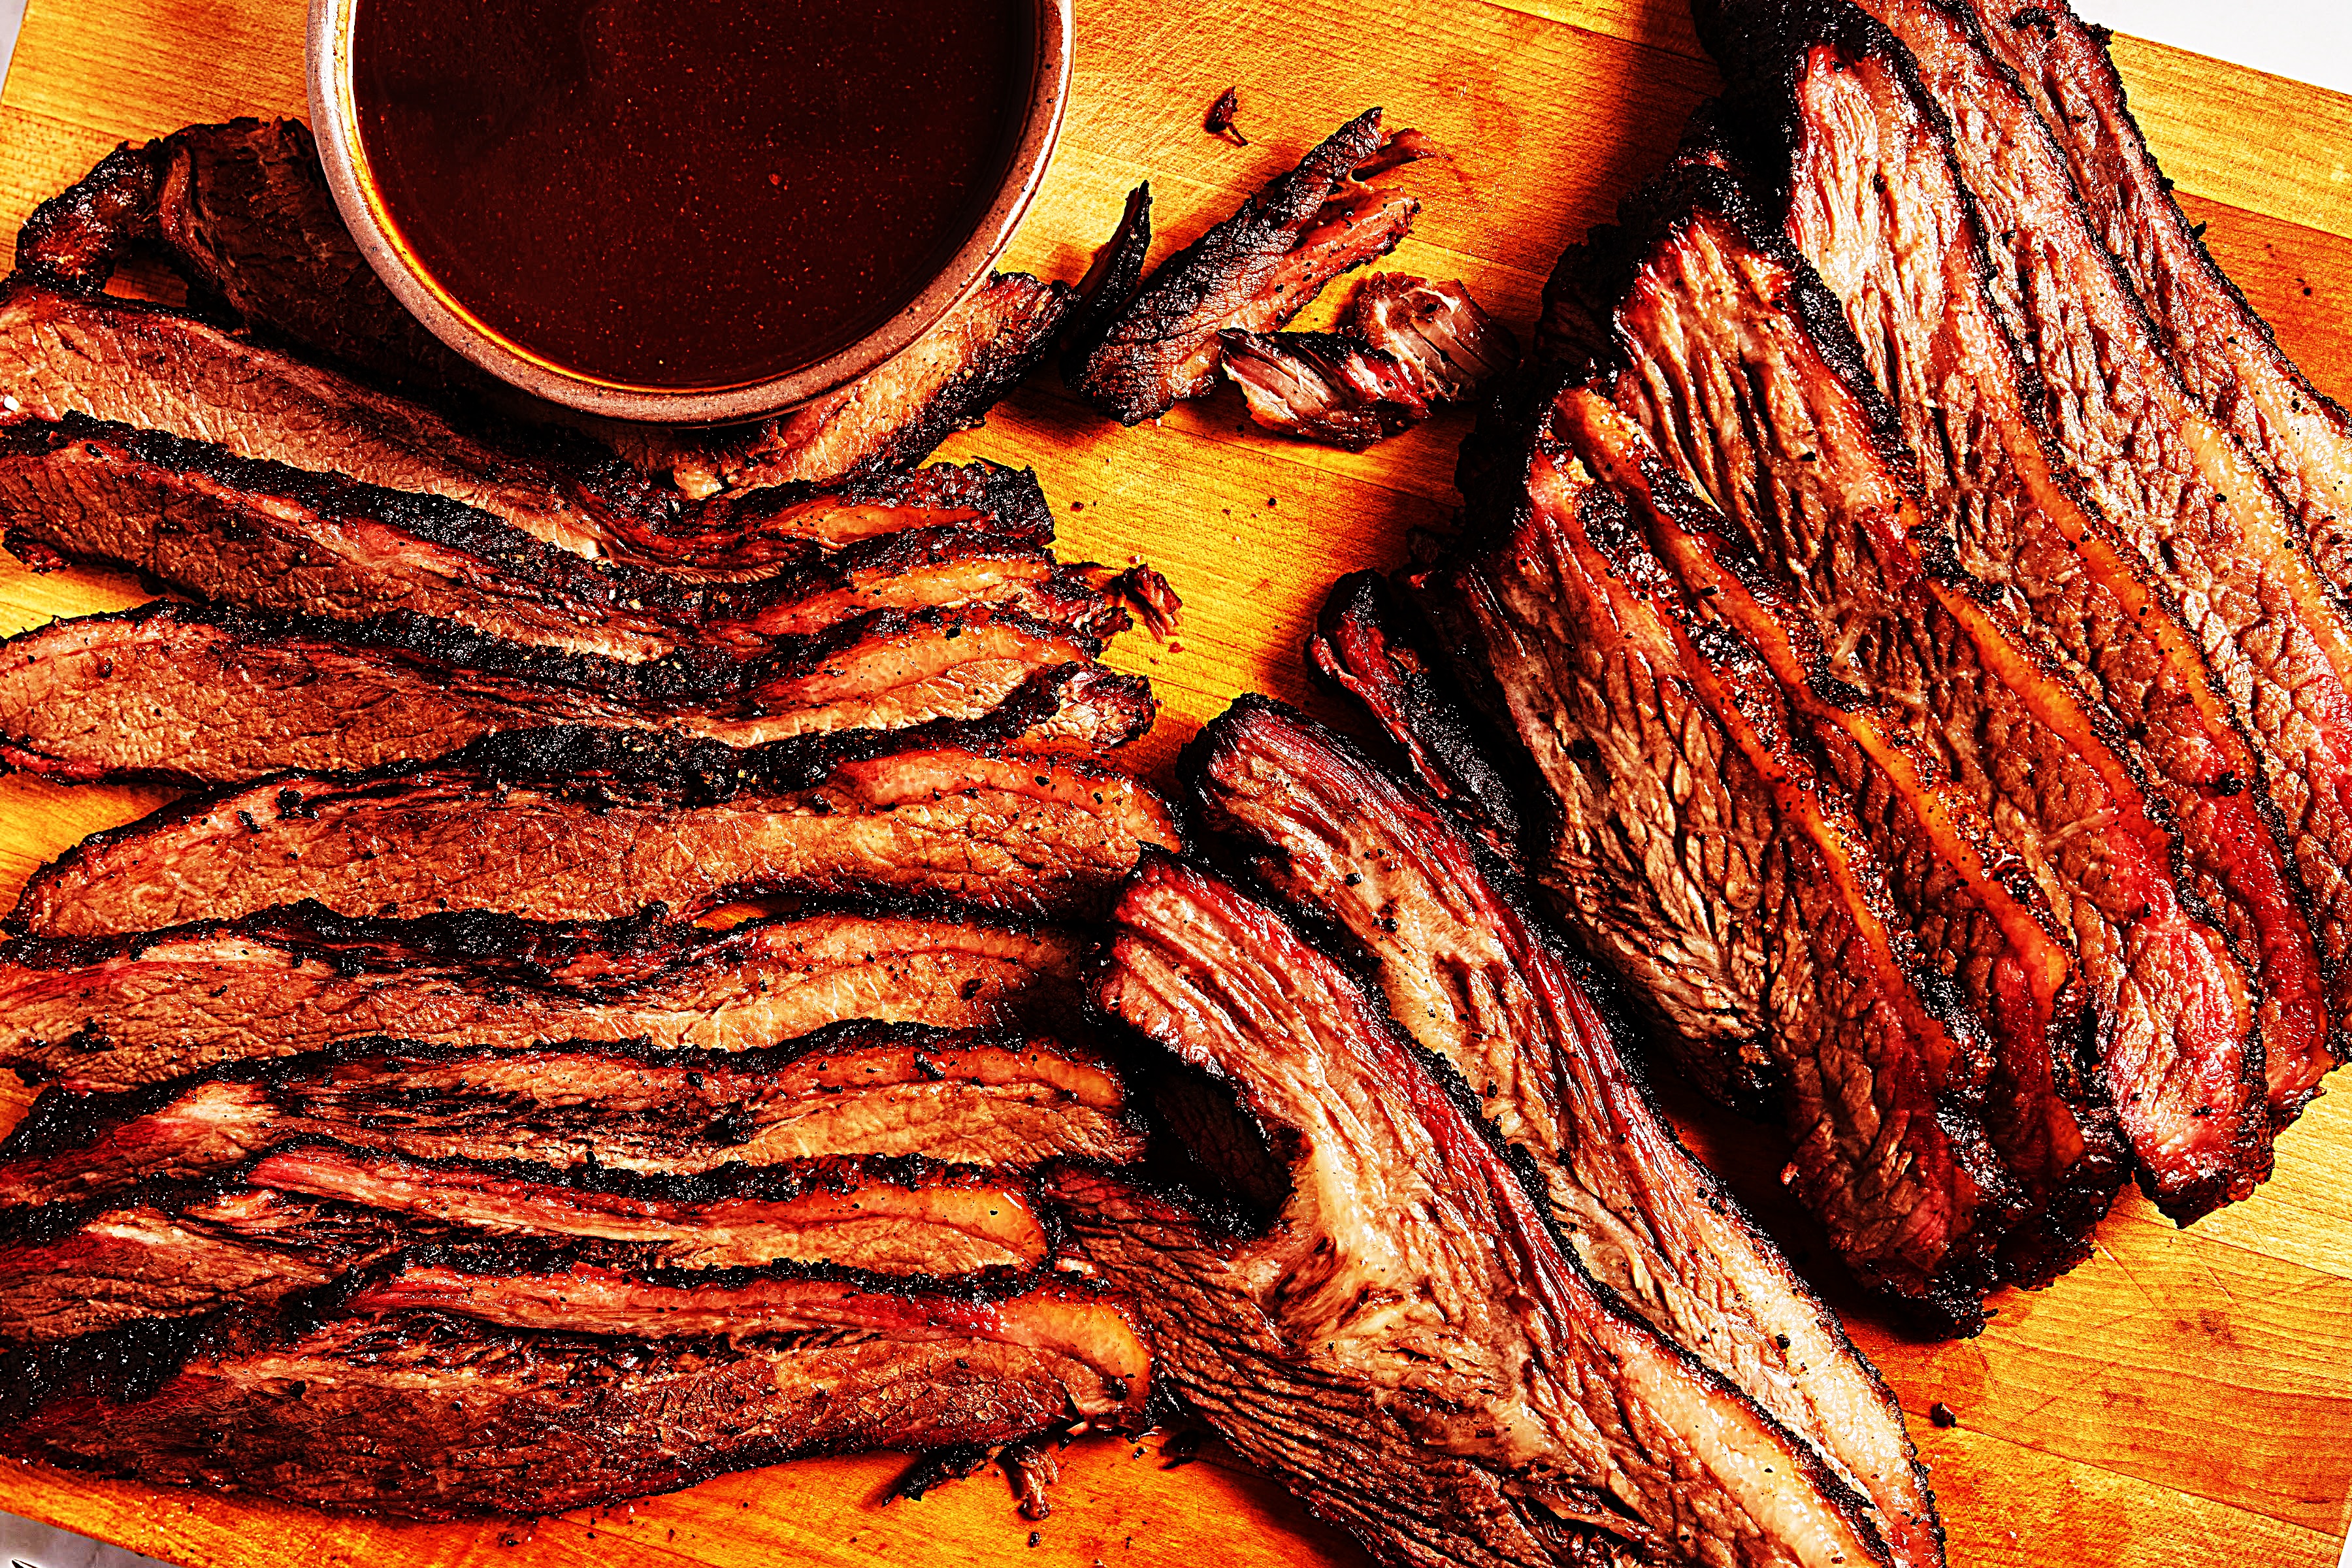 Stupid-Easy Recipe for Hickory Smoked Brisket with Root Beer-Maple BBQ Sauce (#1 Top-Rated)